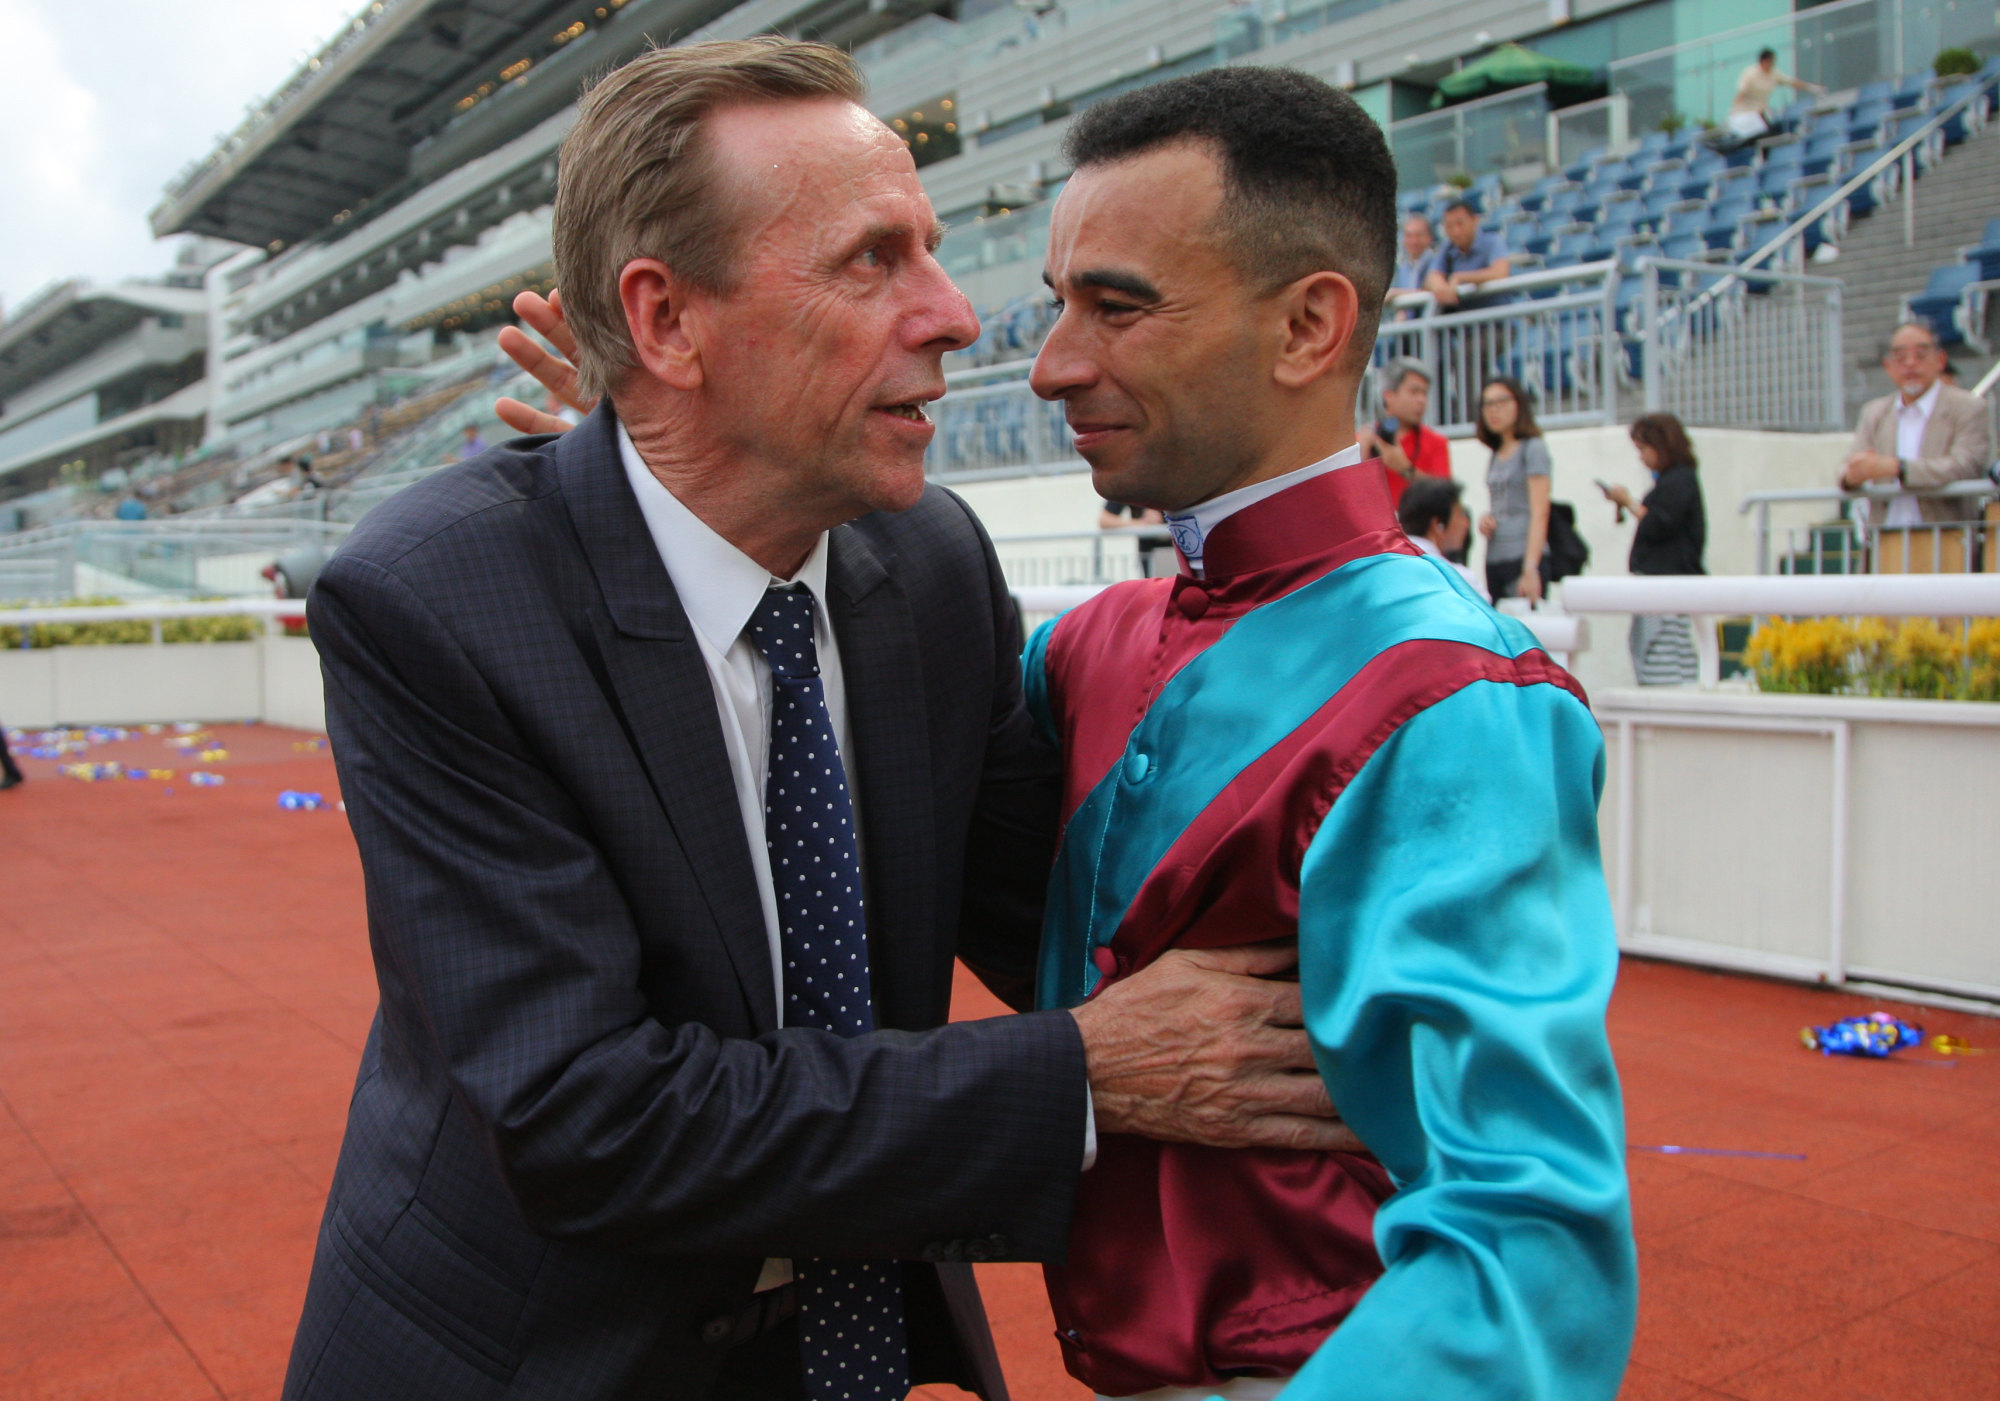 John Size with jockey Joao Moreira after taking out the 2018-19 trainers’ title.